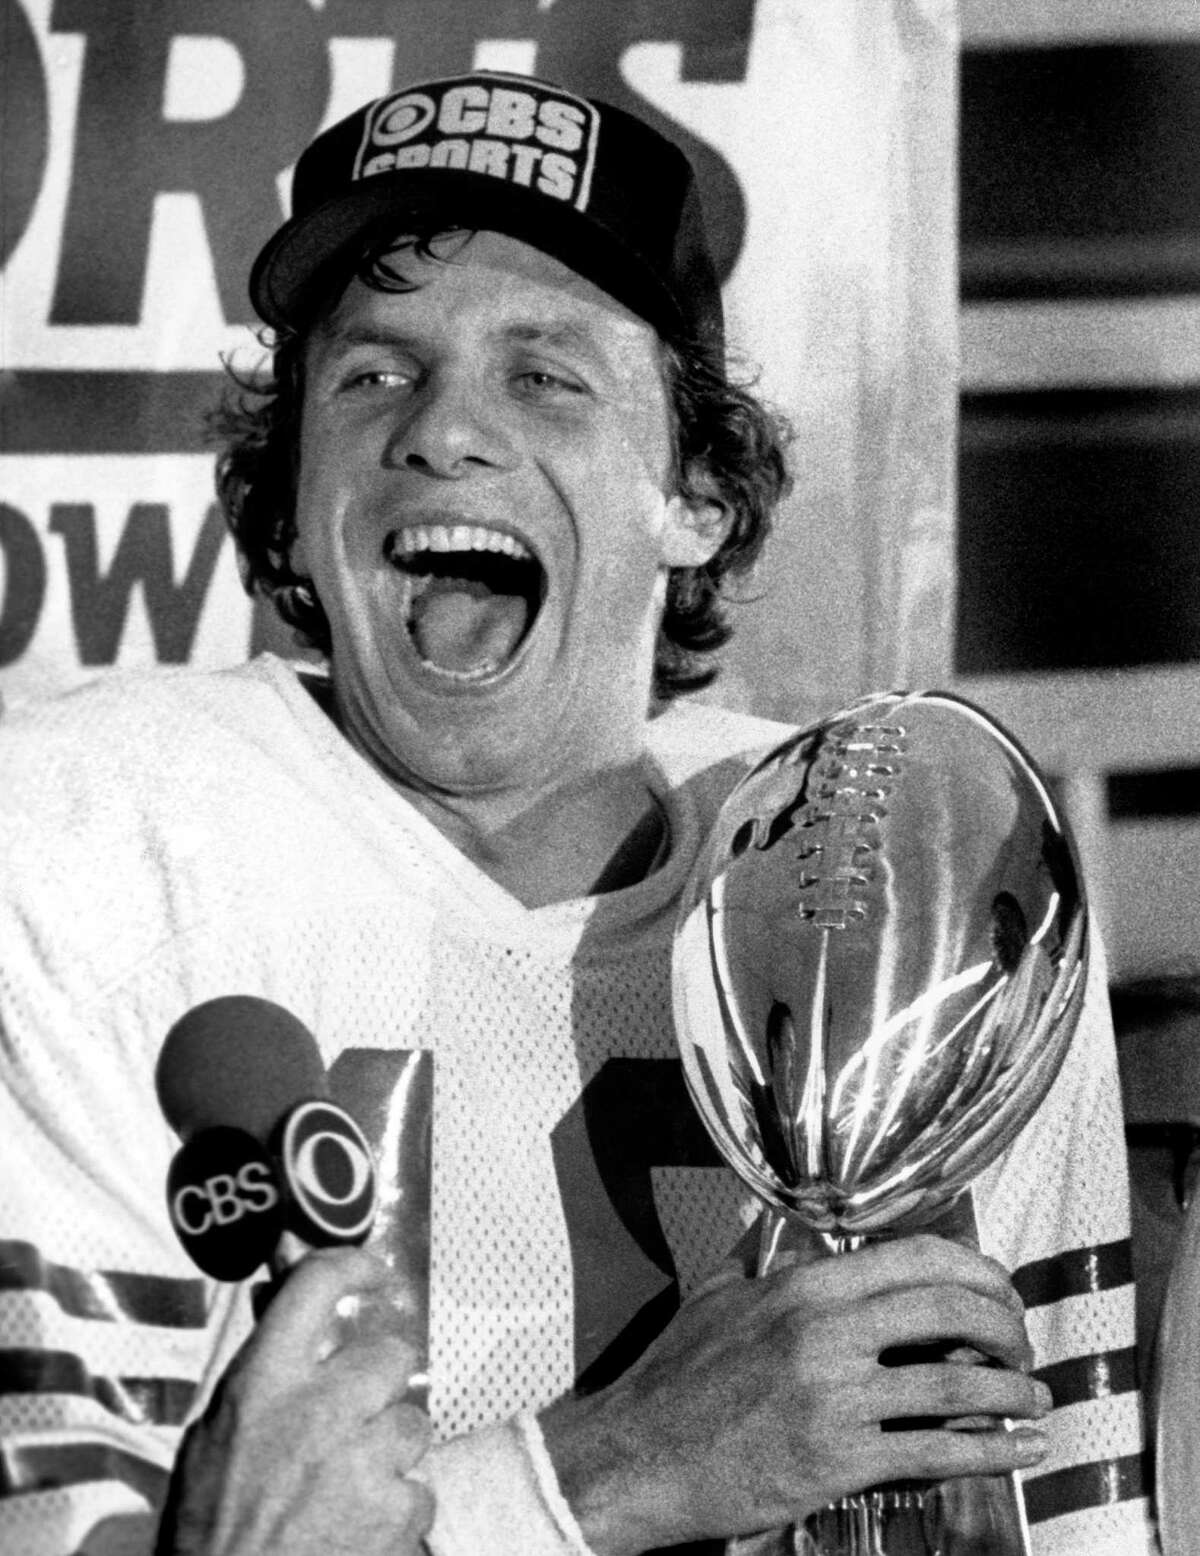 Joe Montana celebrates with the Lombardi Trophy, and he got his hands on more hardware by being named MVP.